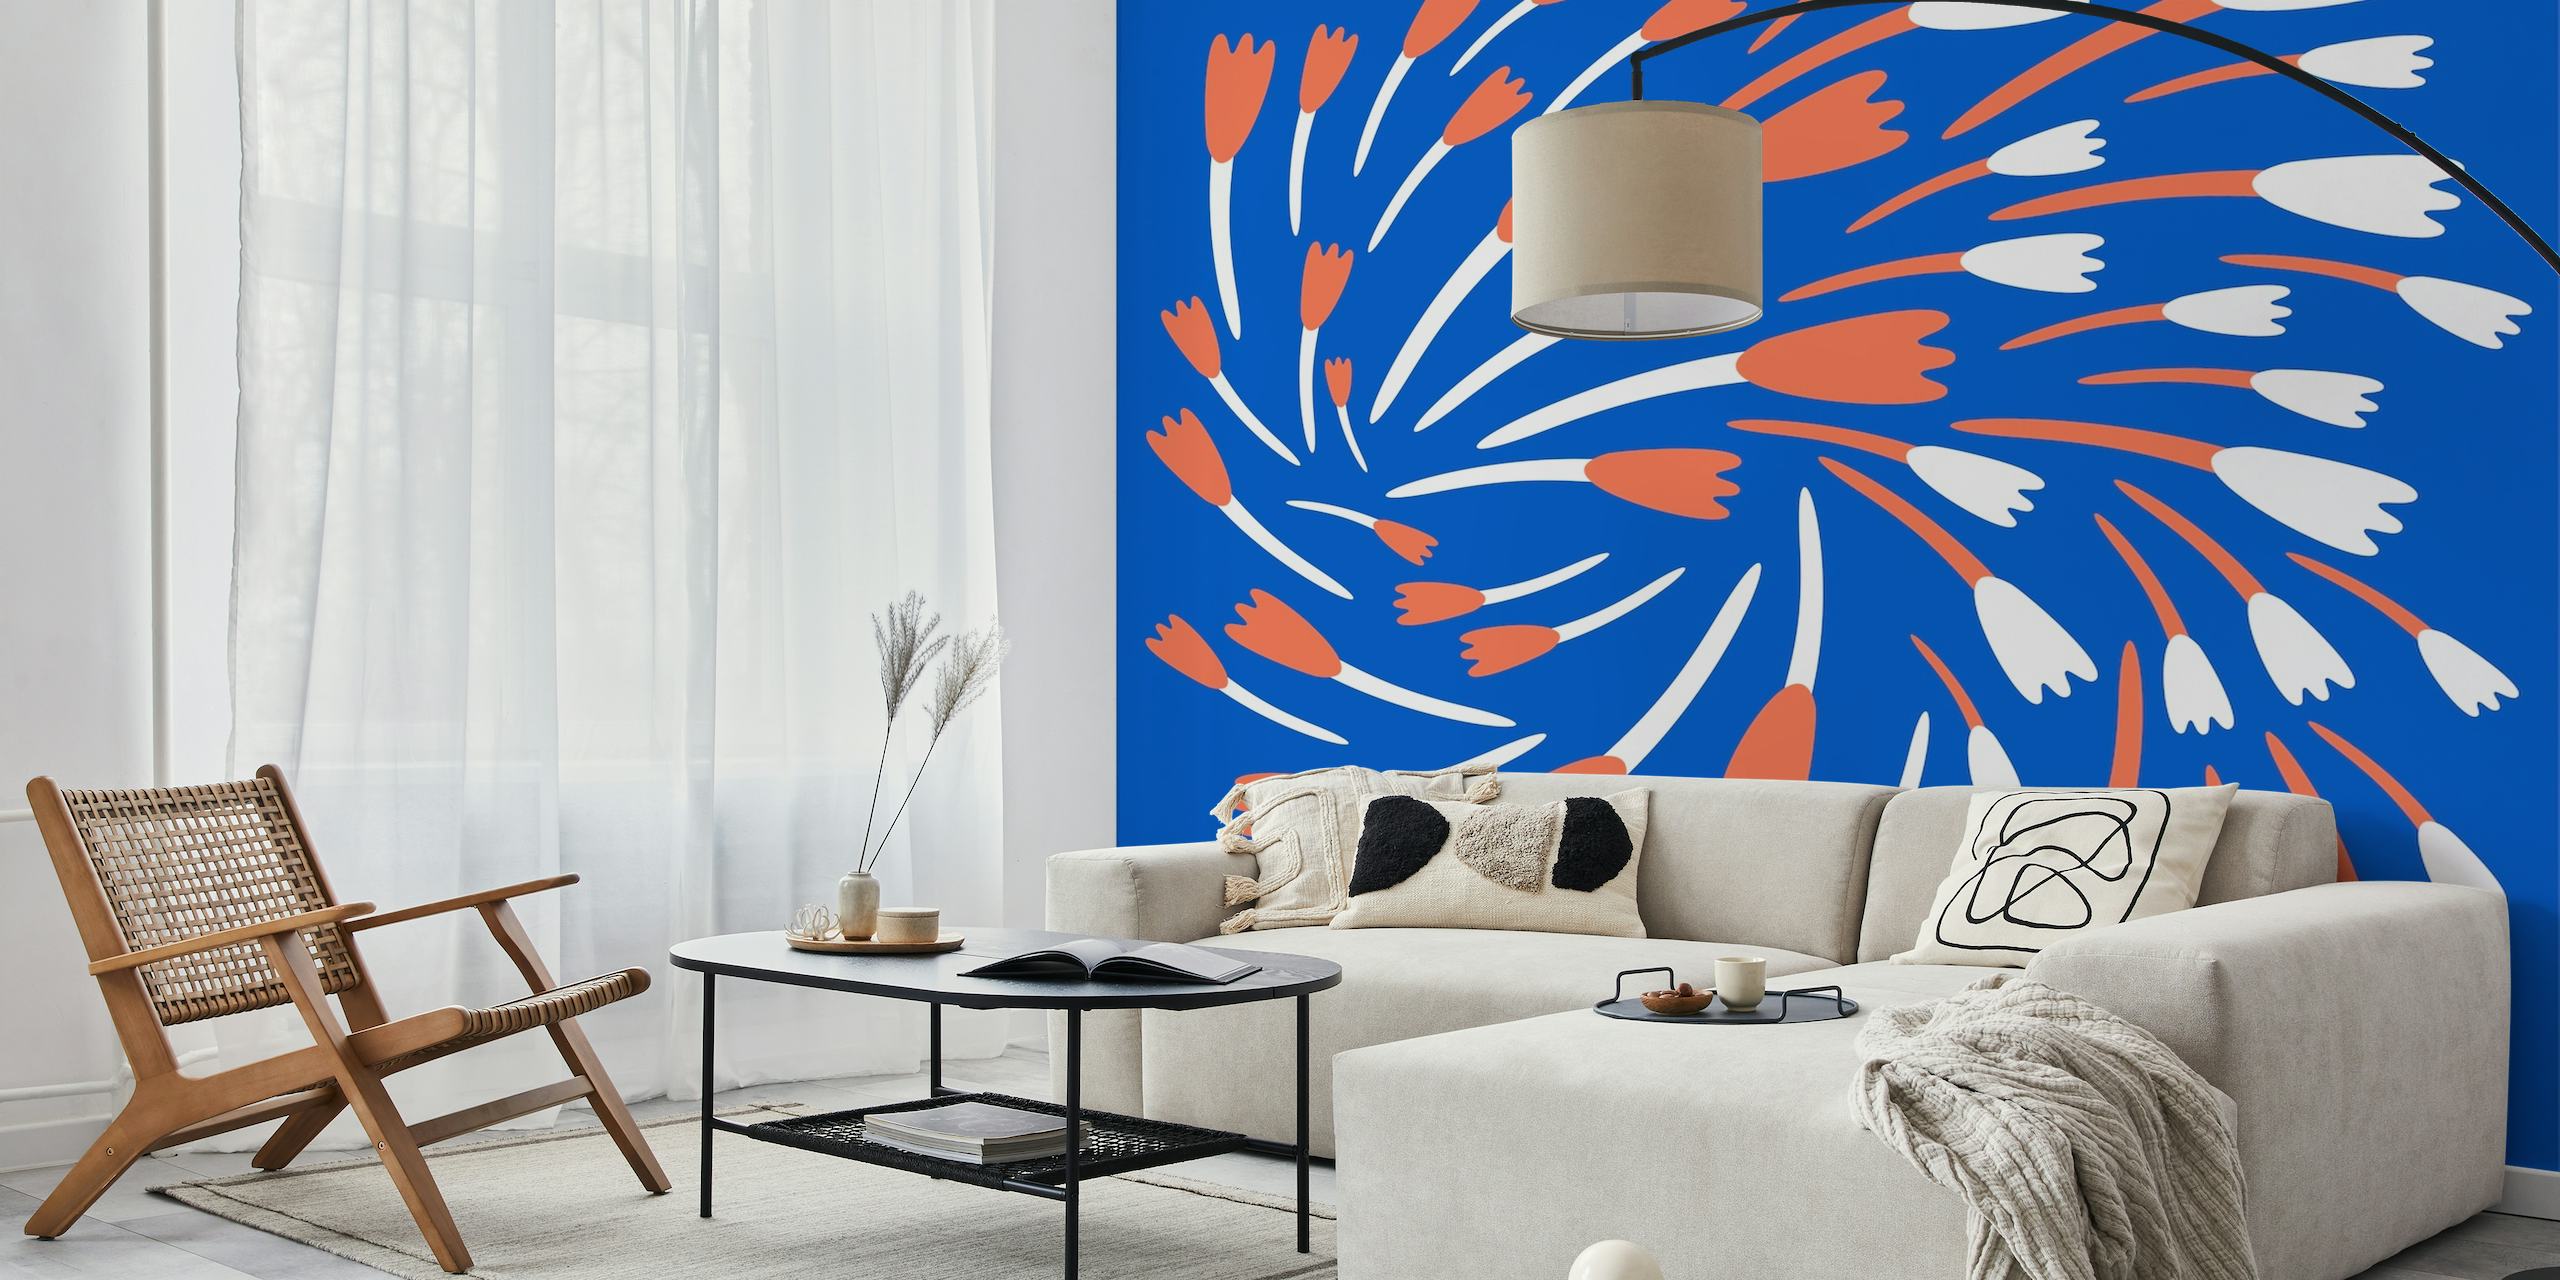 Floral Pattern in blue orange and white papel pintado